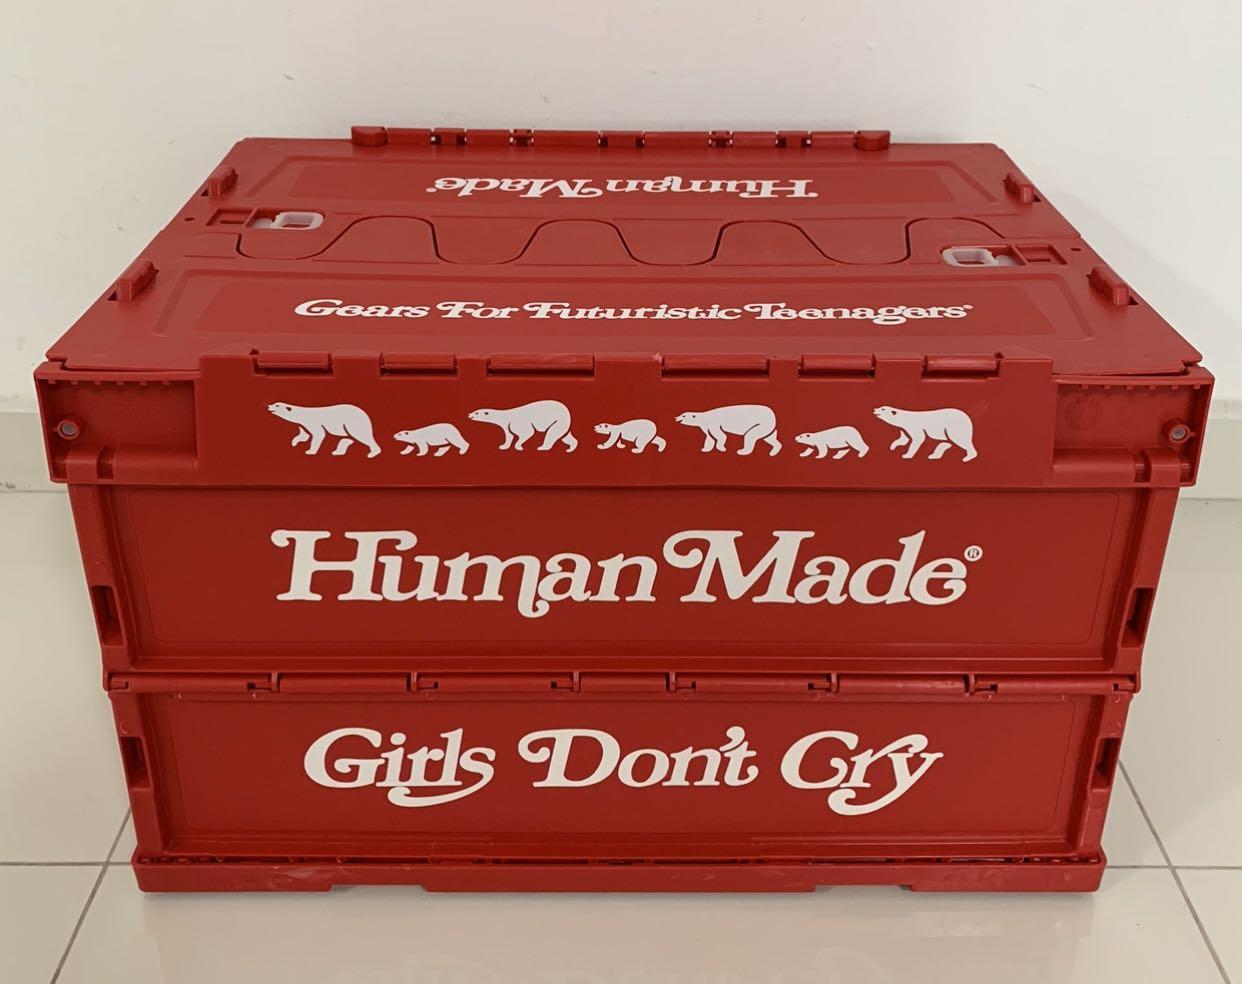 HUMAN MADE Girl's Don't Cry CONTAINER